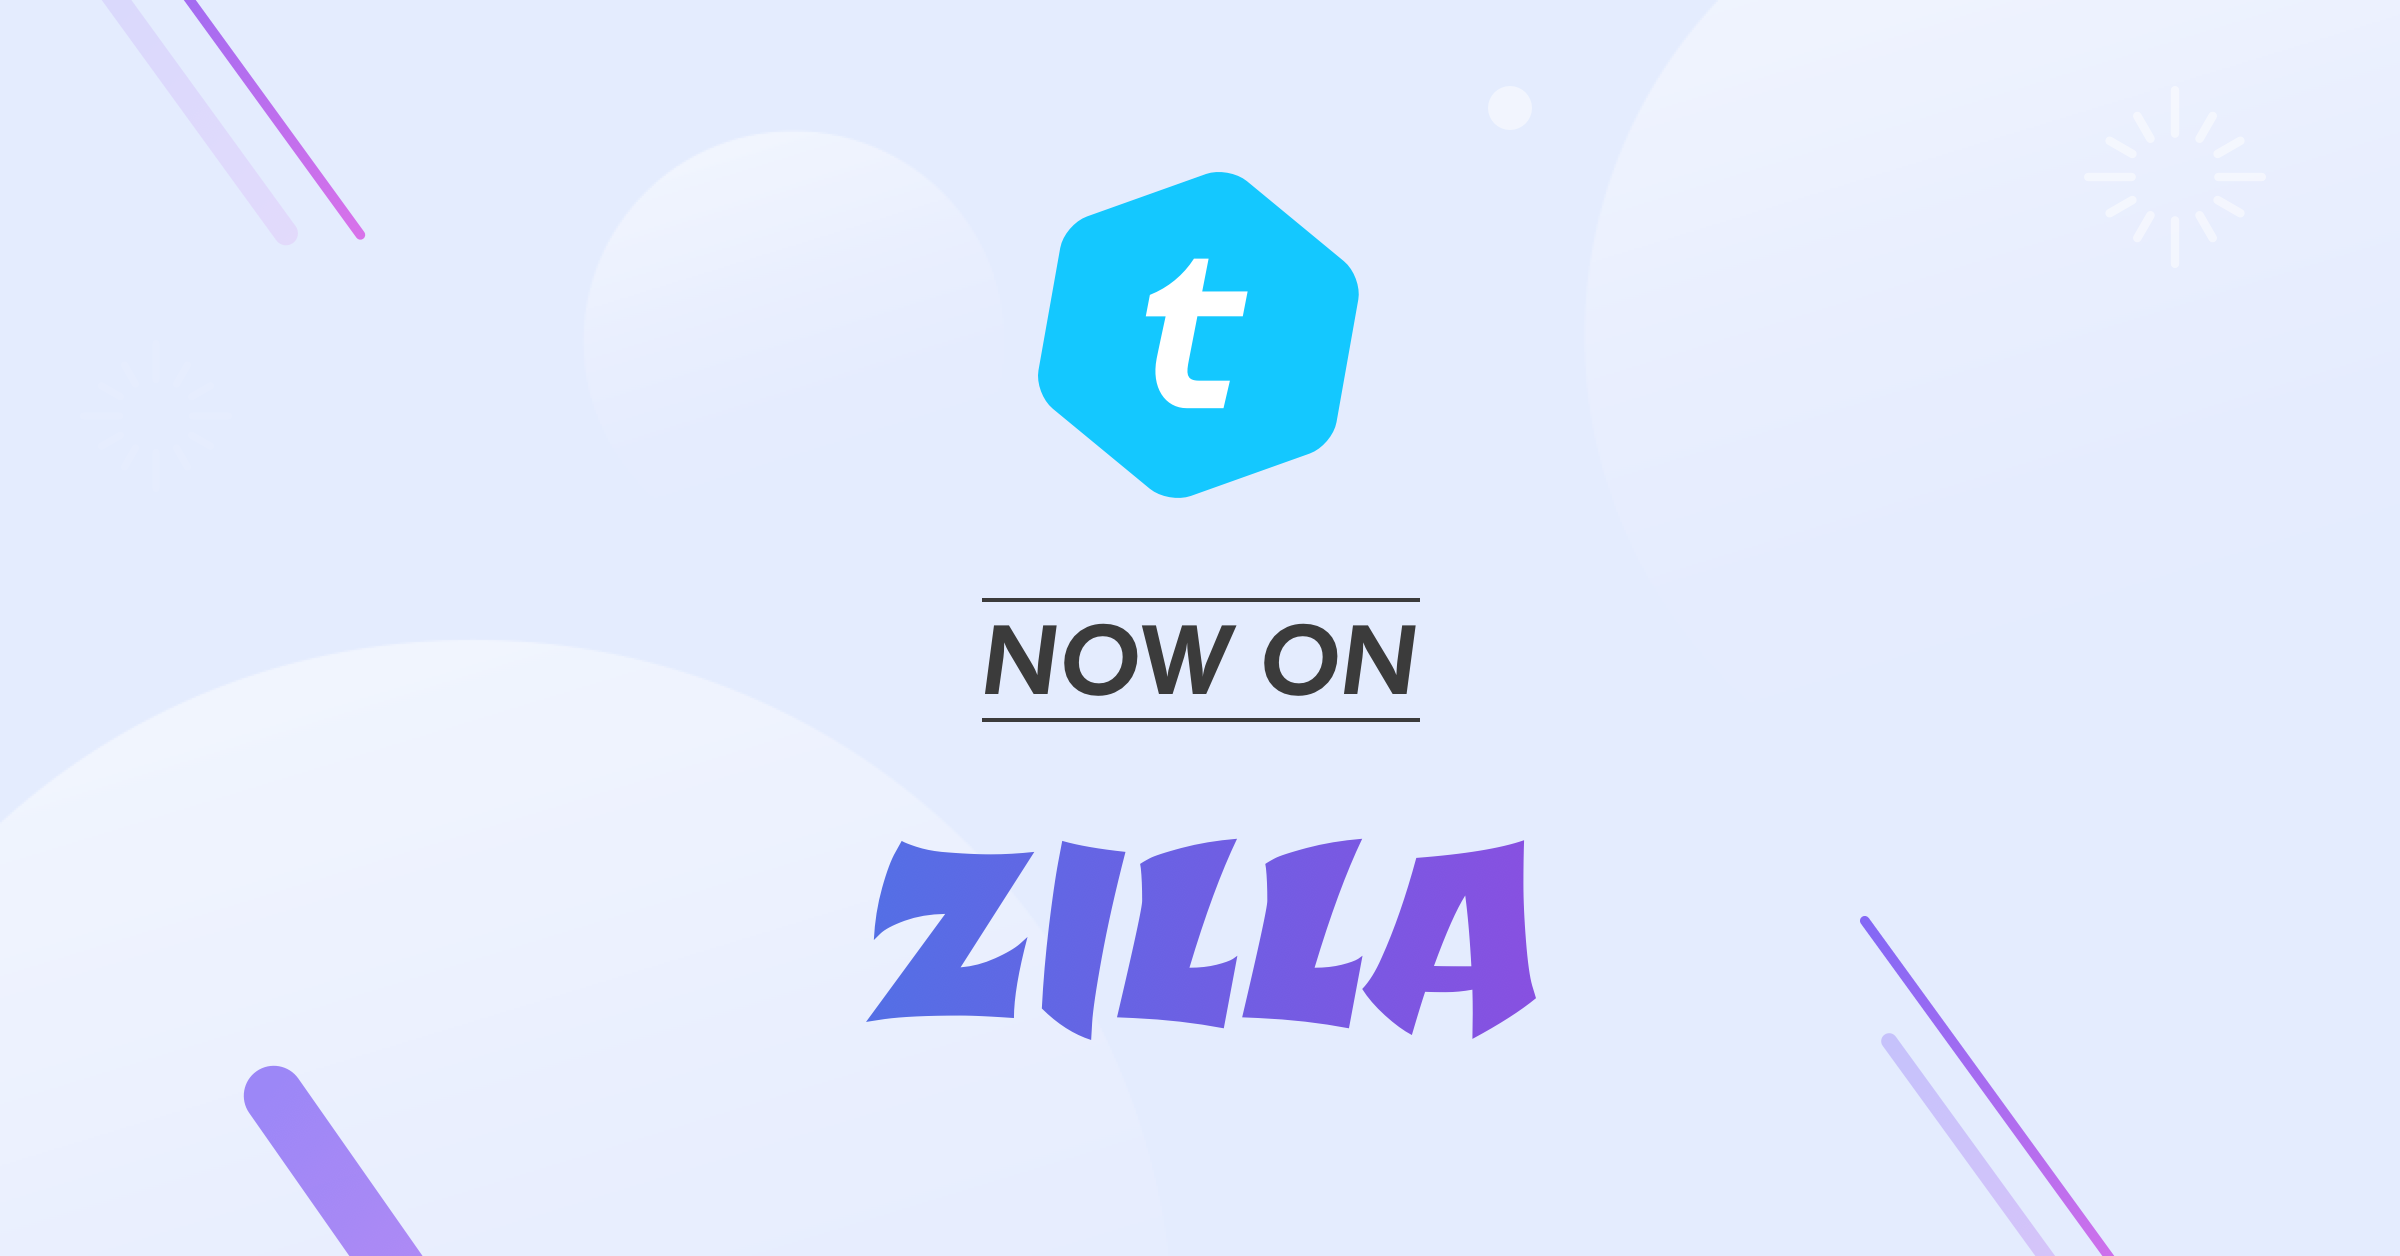 Telcoin (TEL) is now on ZILLA. We are pleased to announce ...